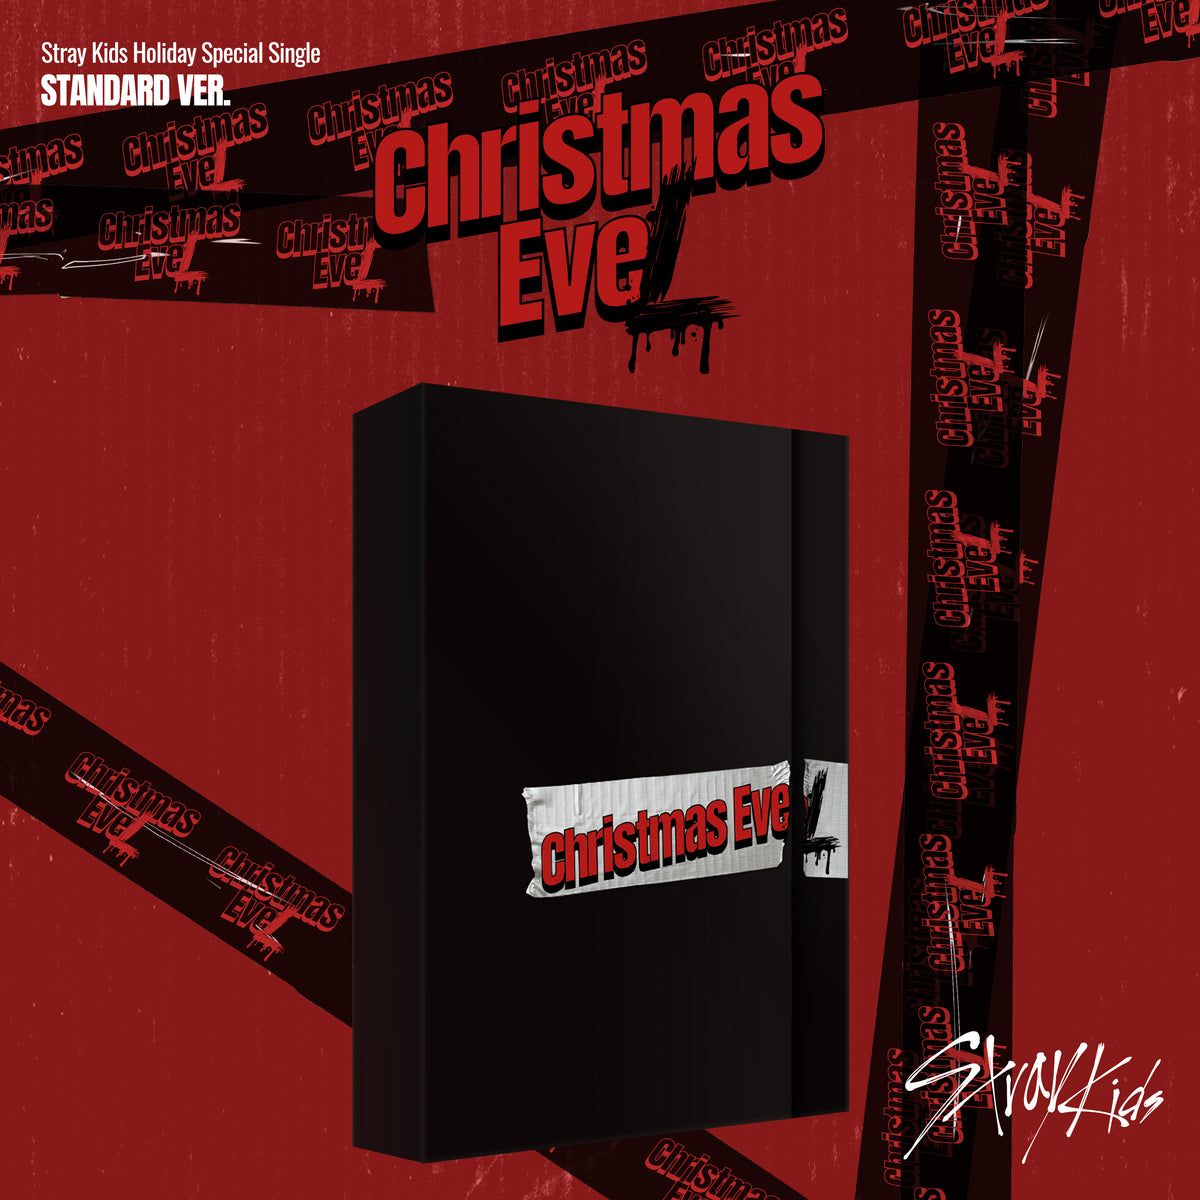 STRAY KIDS HOLIDAY SPECIAL SINGLE ALBUM - CHRISTMAS EVEL (STANDARD VER.) +  EXCLUSIVE PHOTOCARD